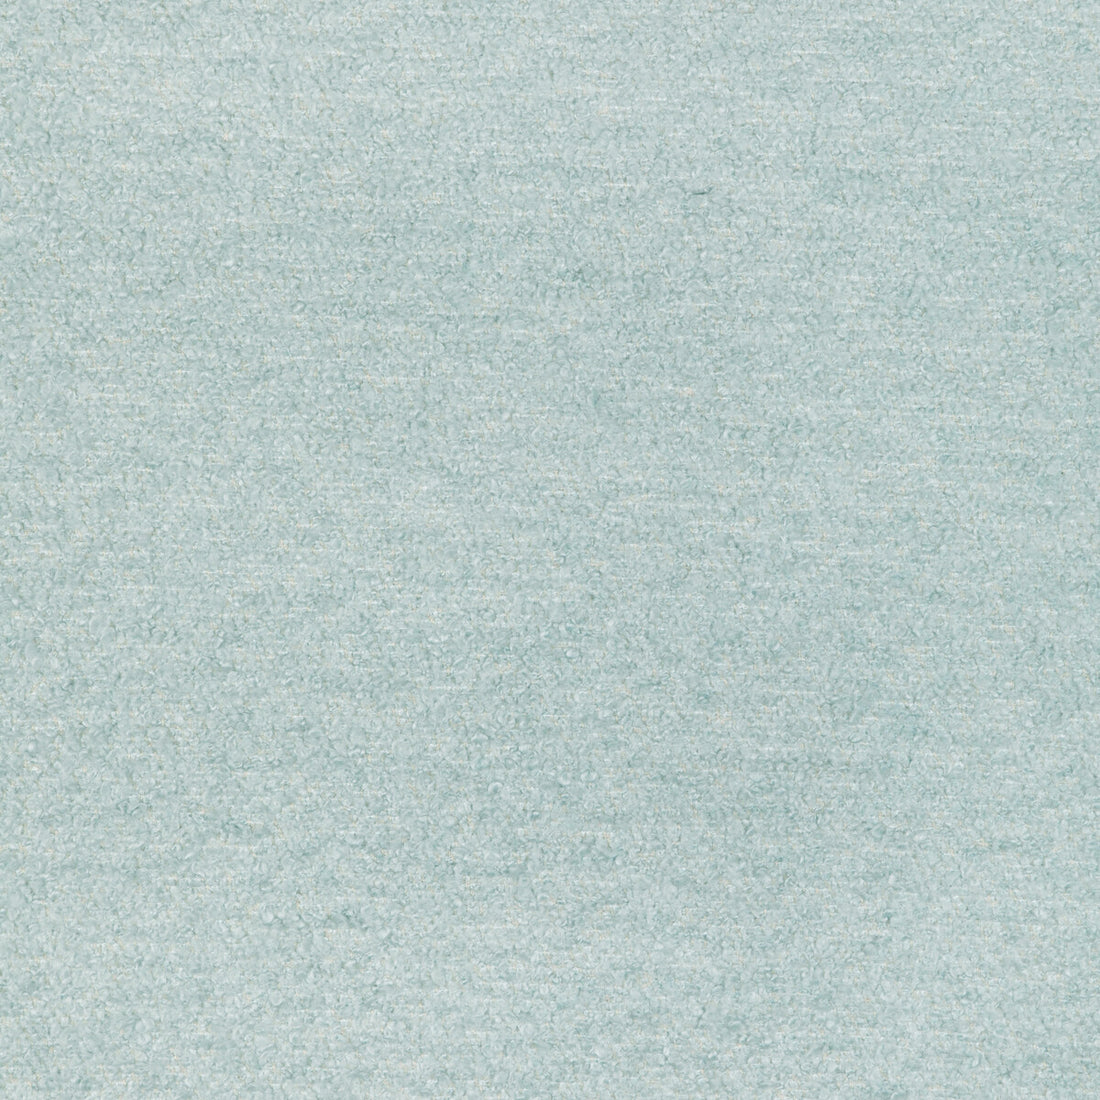 Boucle All Day fabric in spa color - pattern 36761.15.0 - by Kravet Smart in the Candice Olson collection